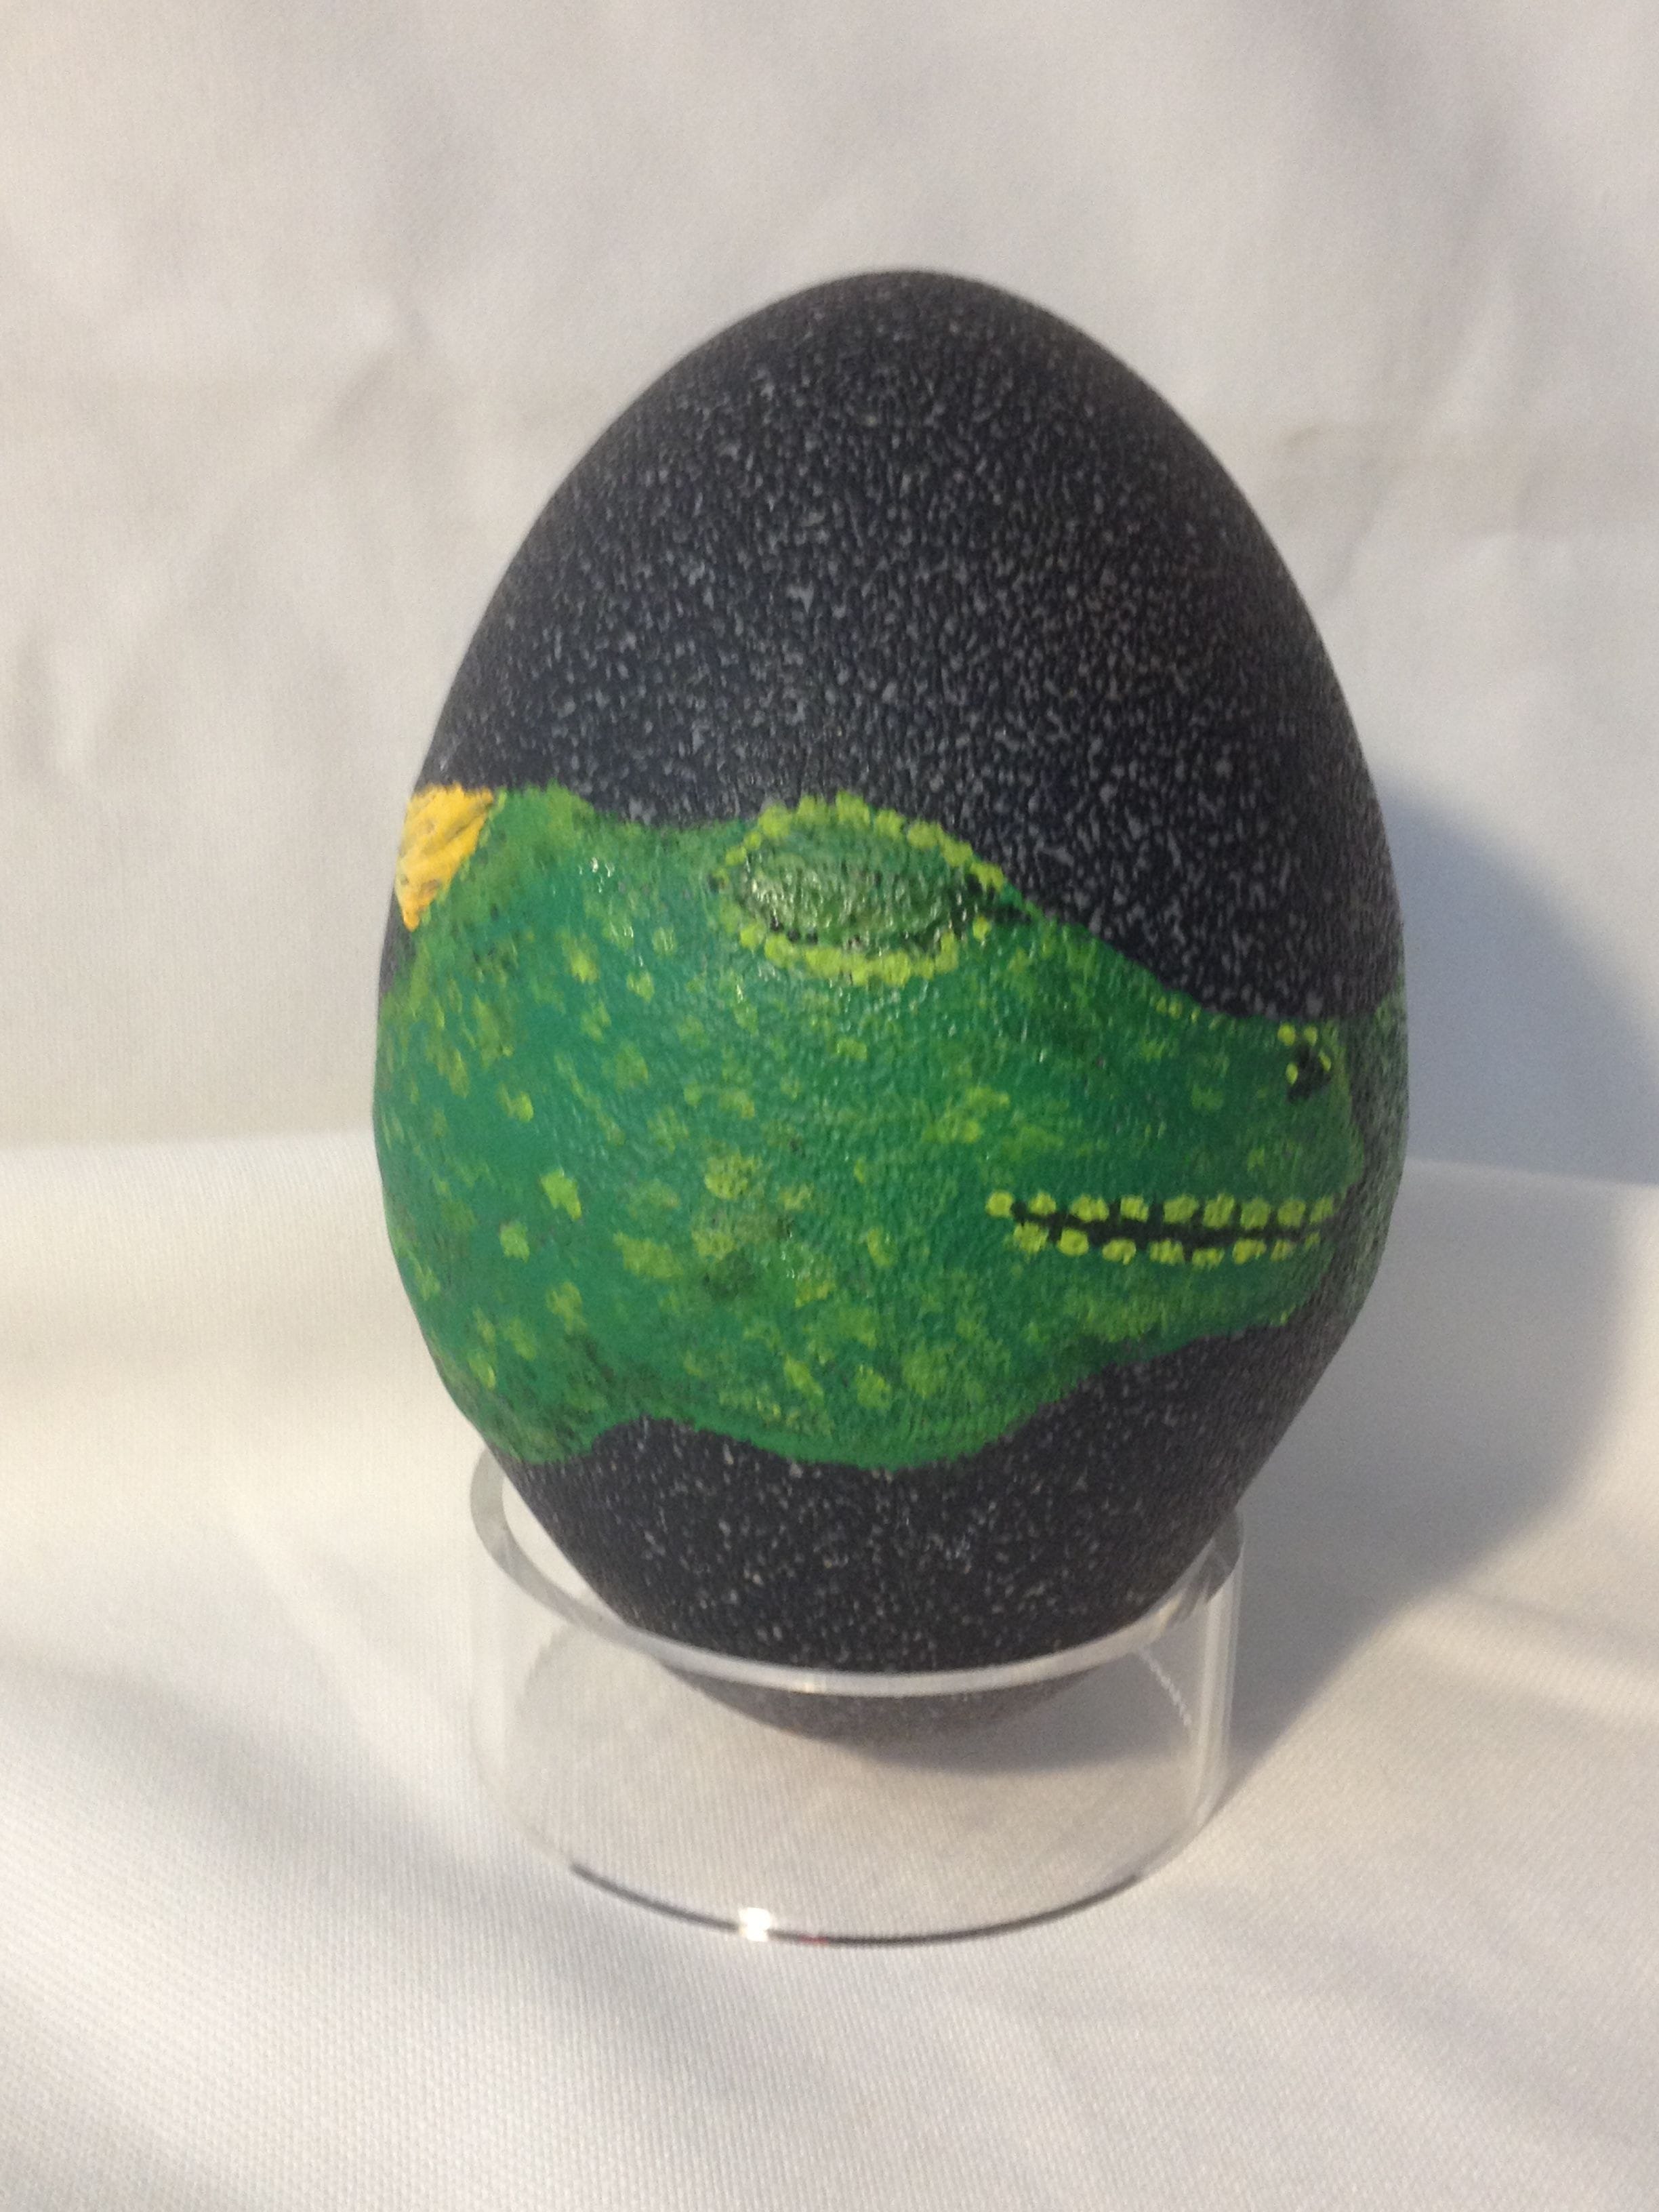 Oil paint of dragon wrapped around Emu egg $40.